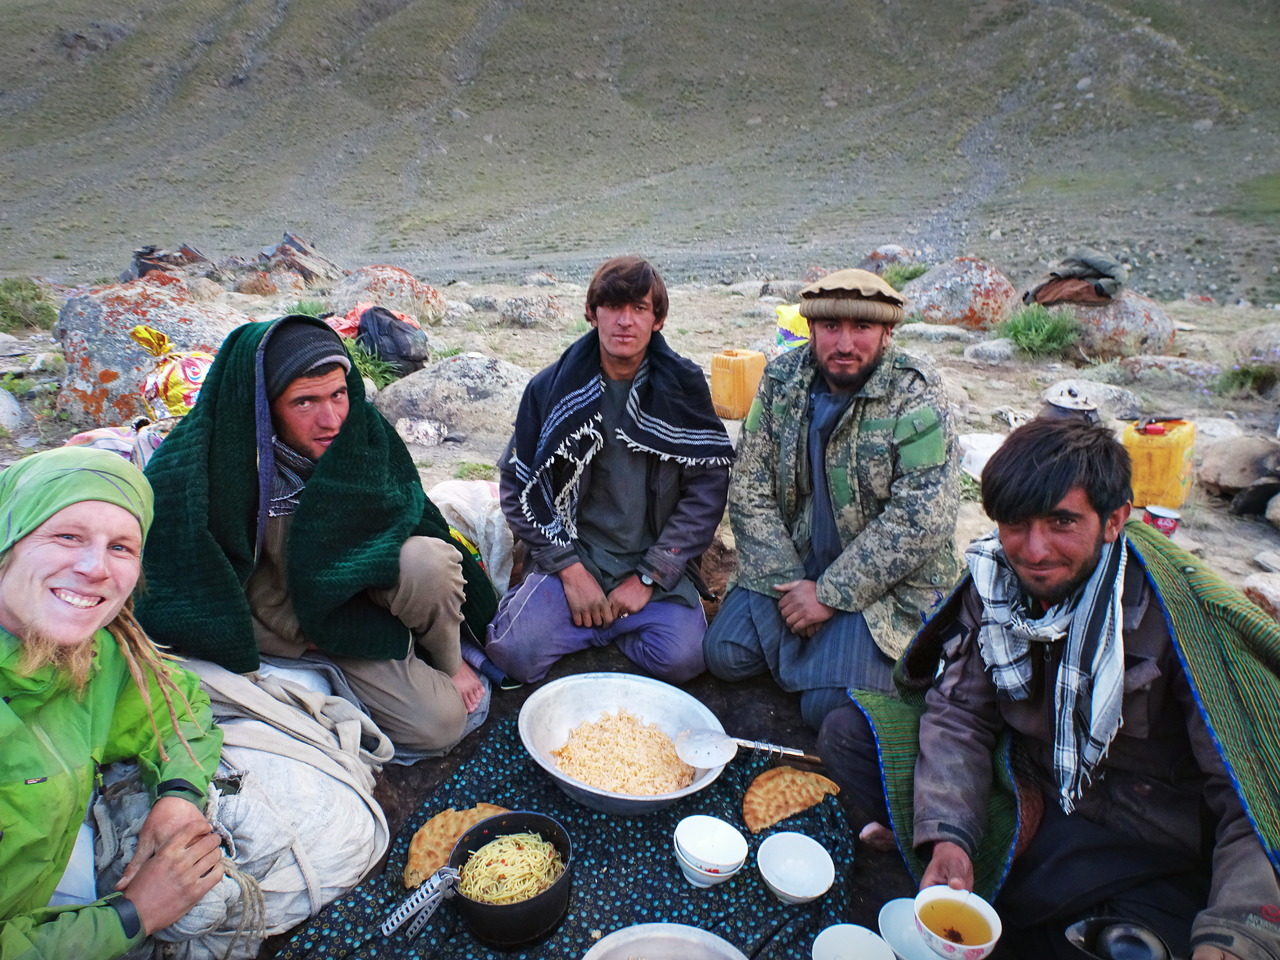 Eating dinner together with Afghan shepherds